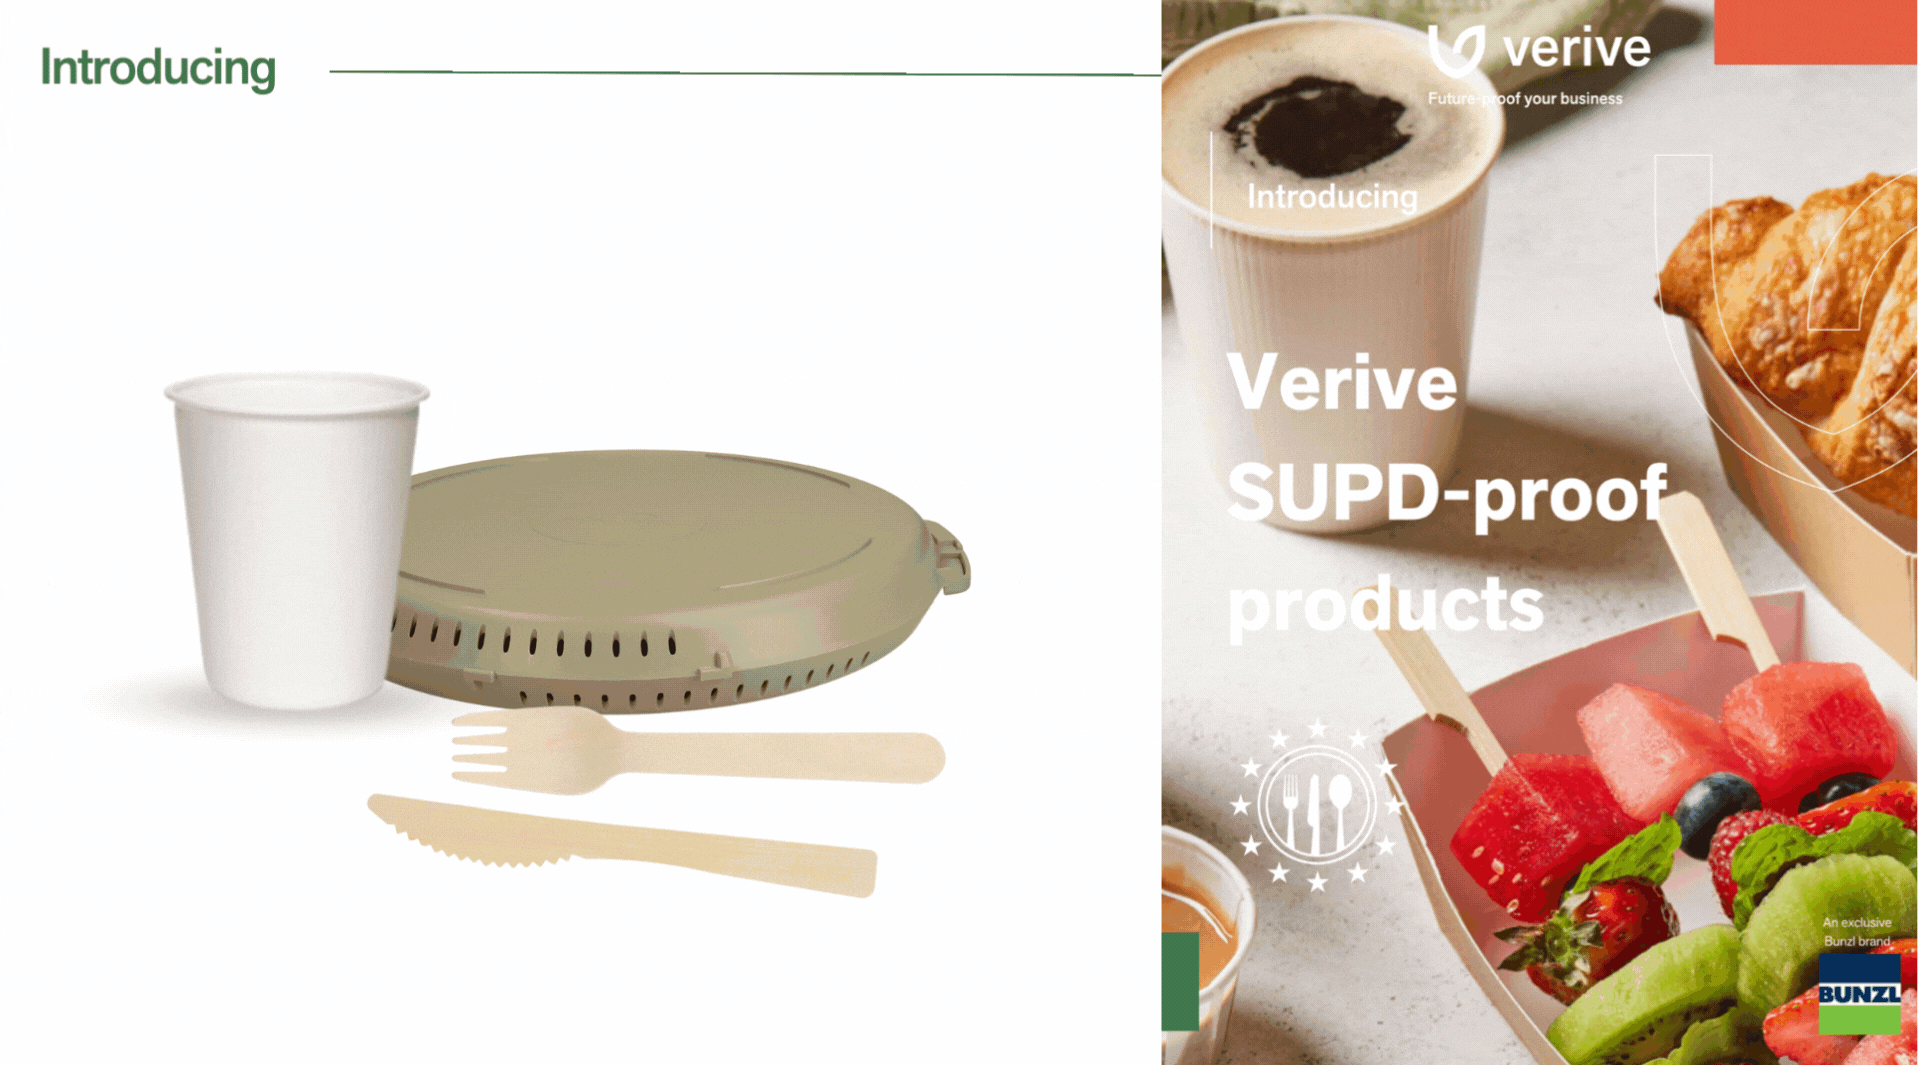 Verive SUP Directive-proof products